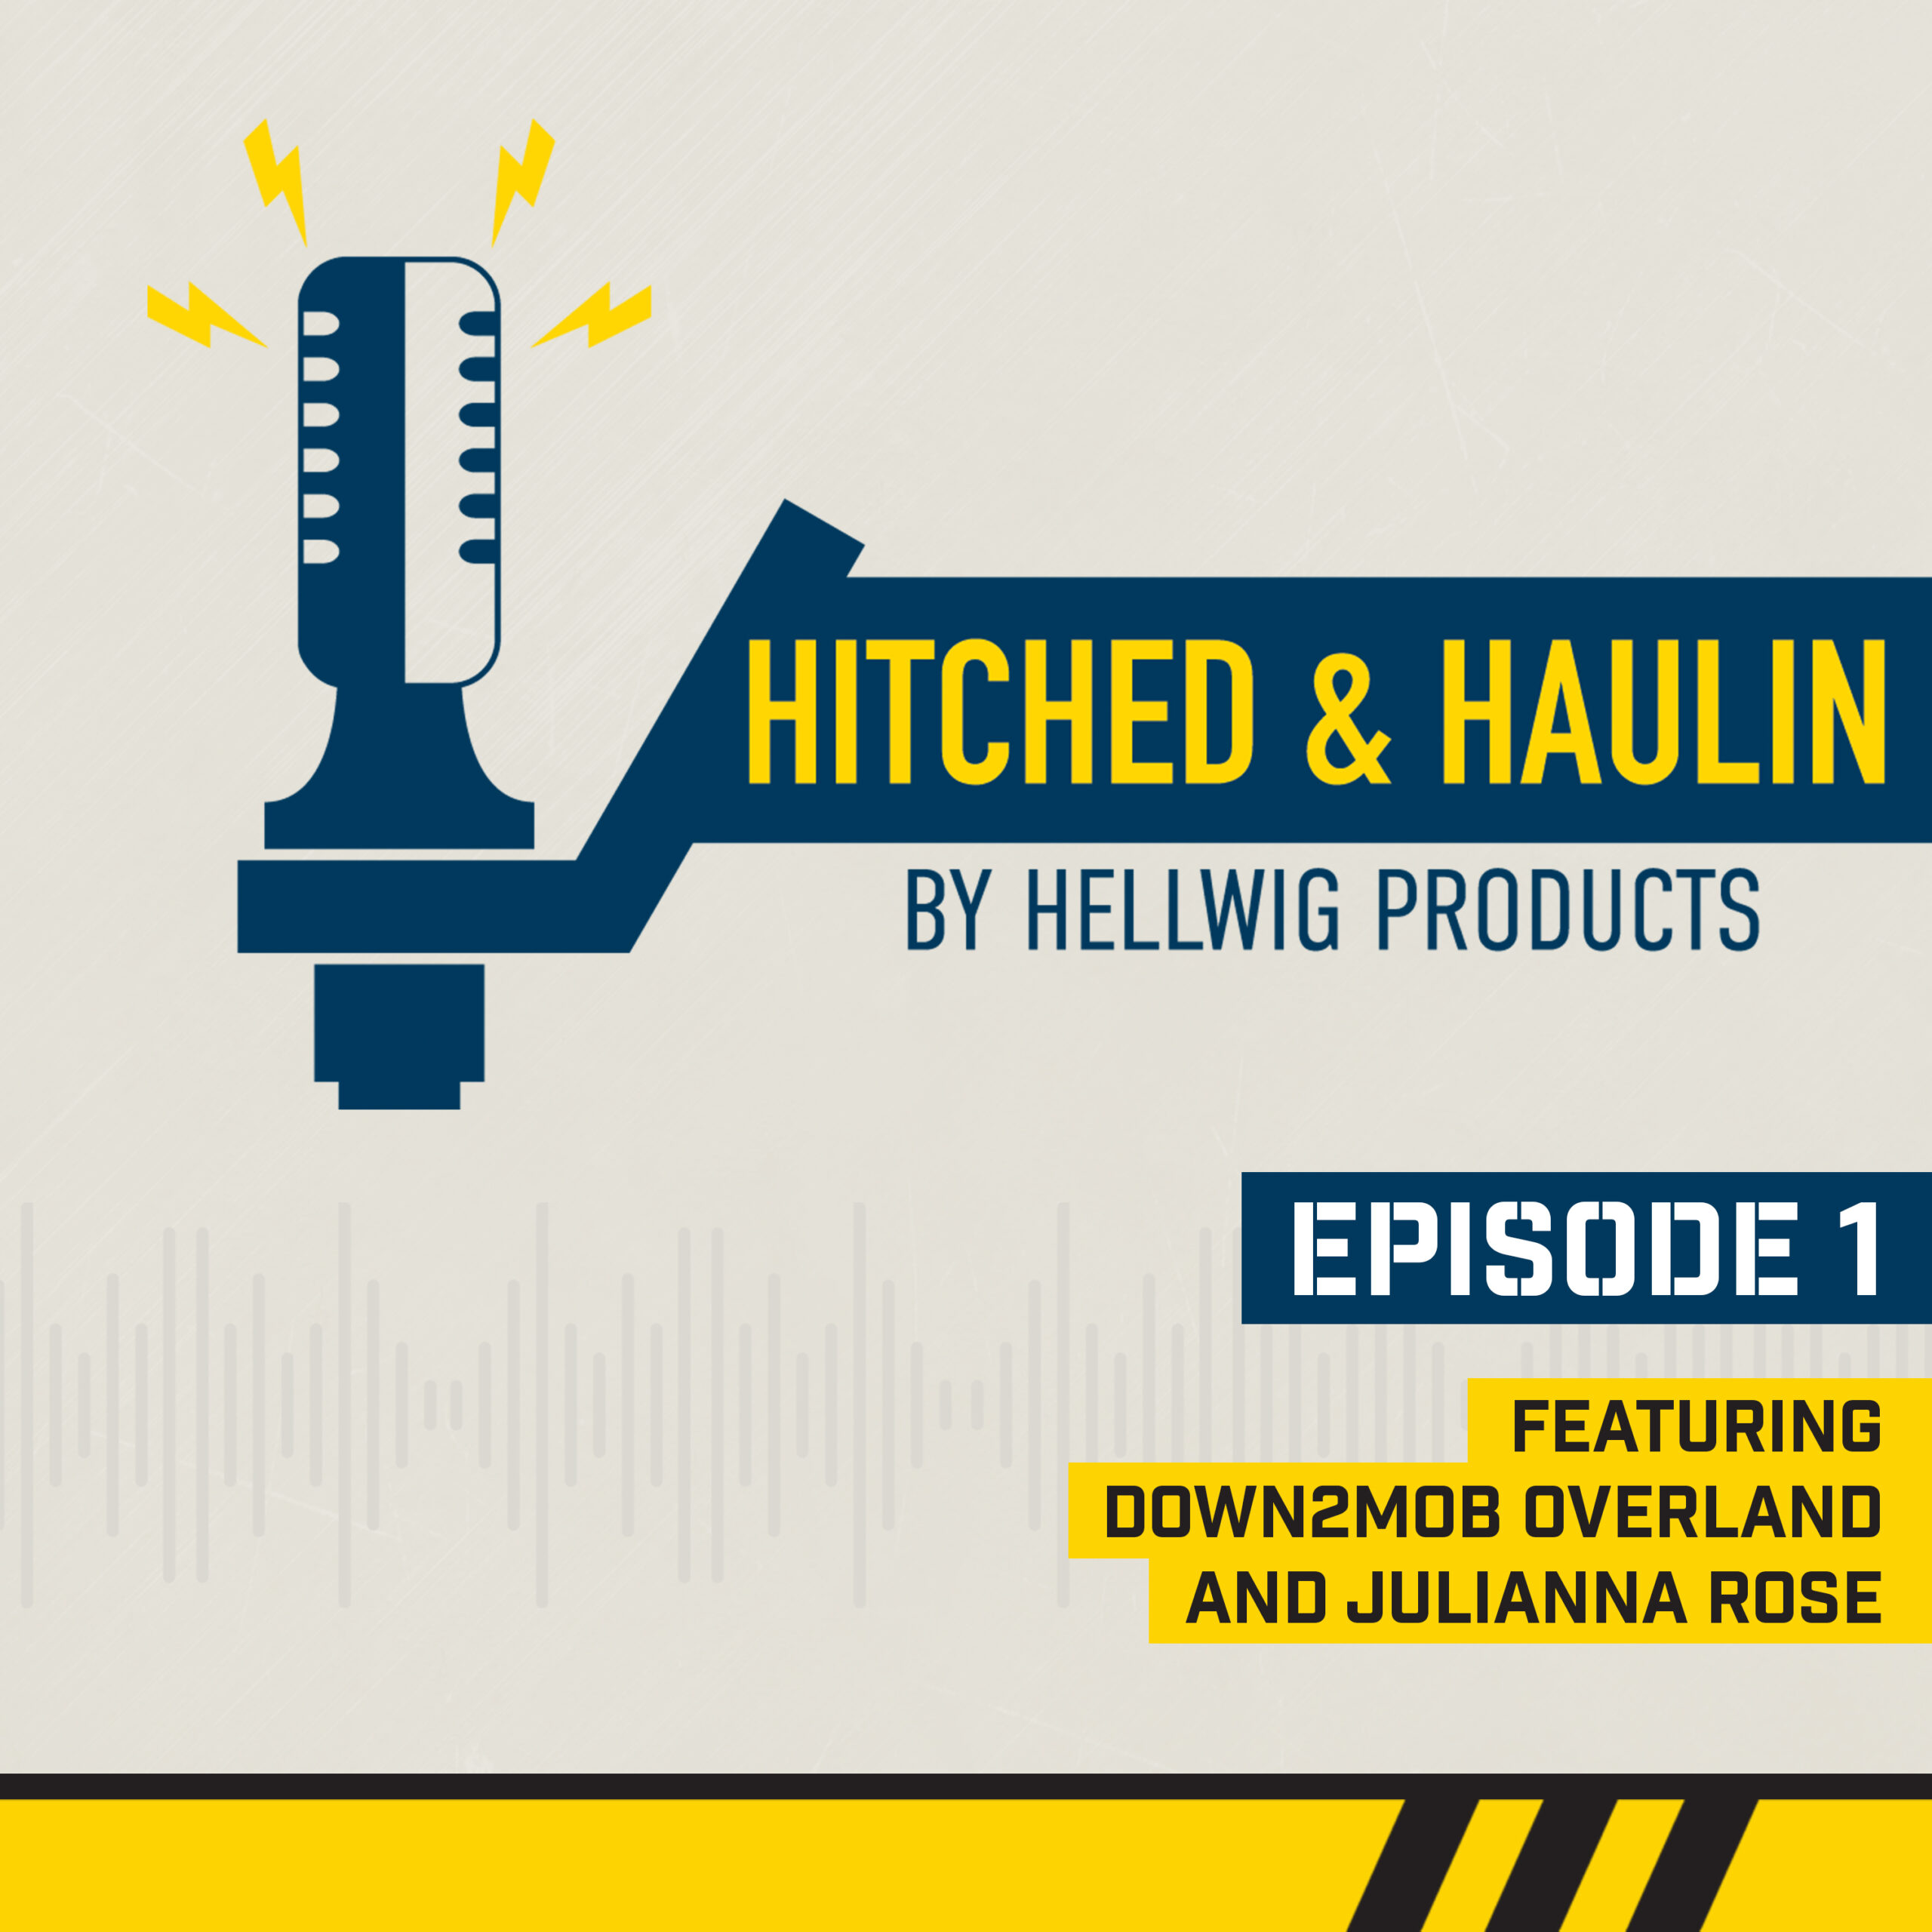 Hellwig Launches ‘Hitched & Haulin’ Podcast | THE SHOP